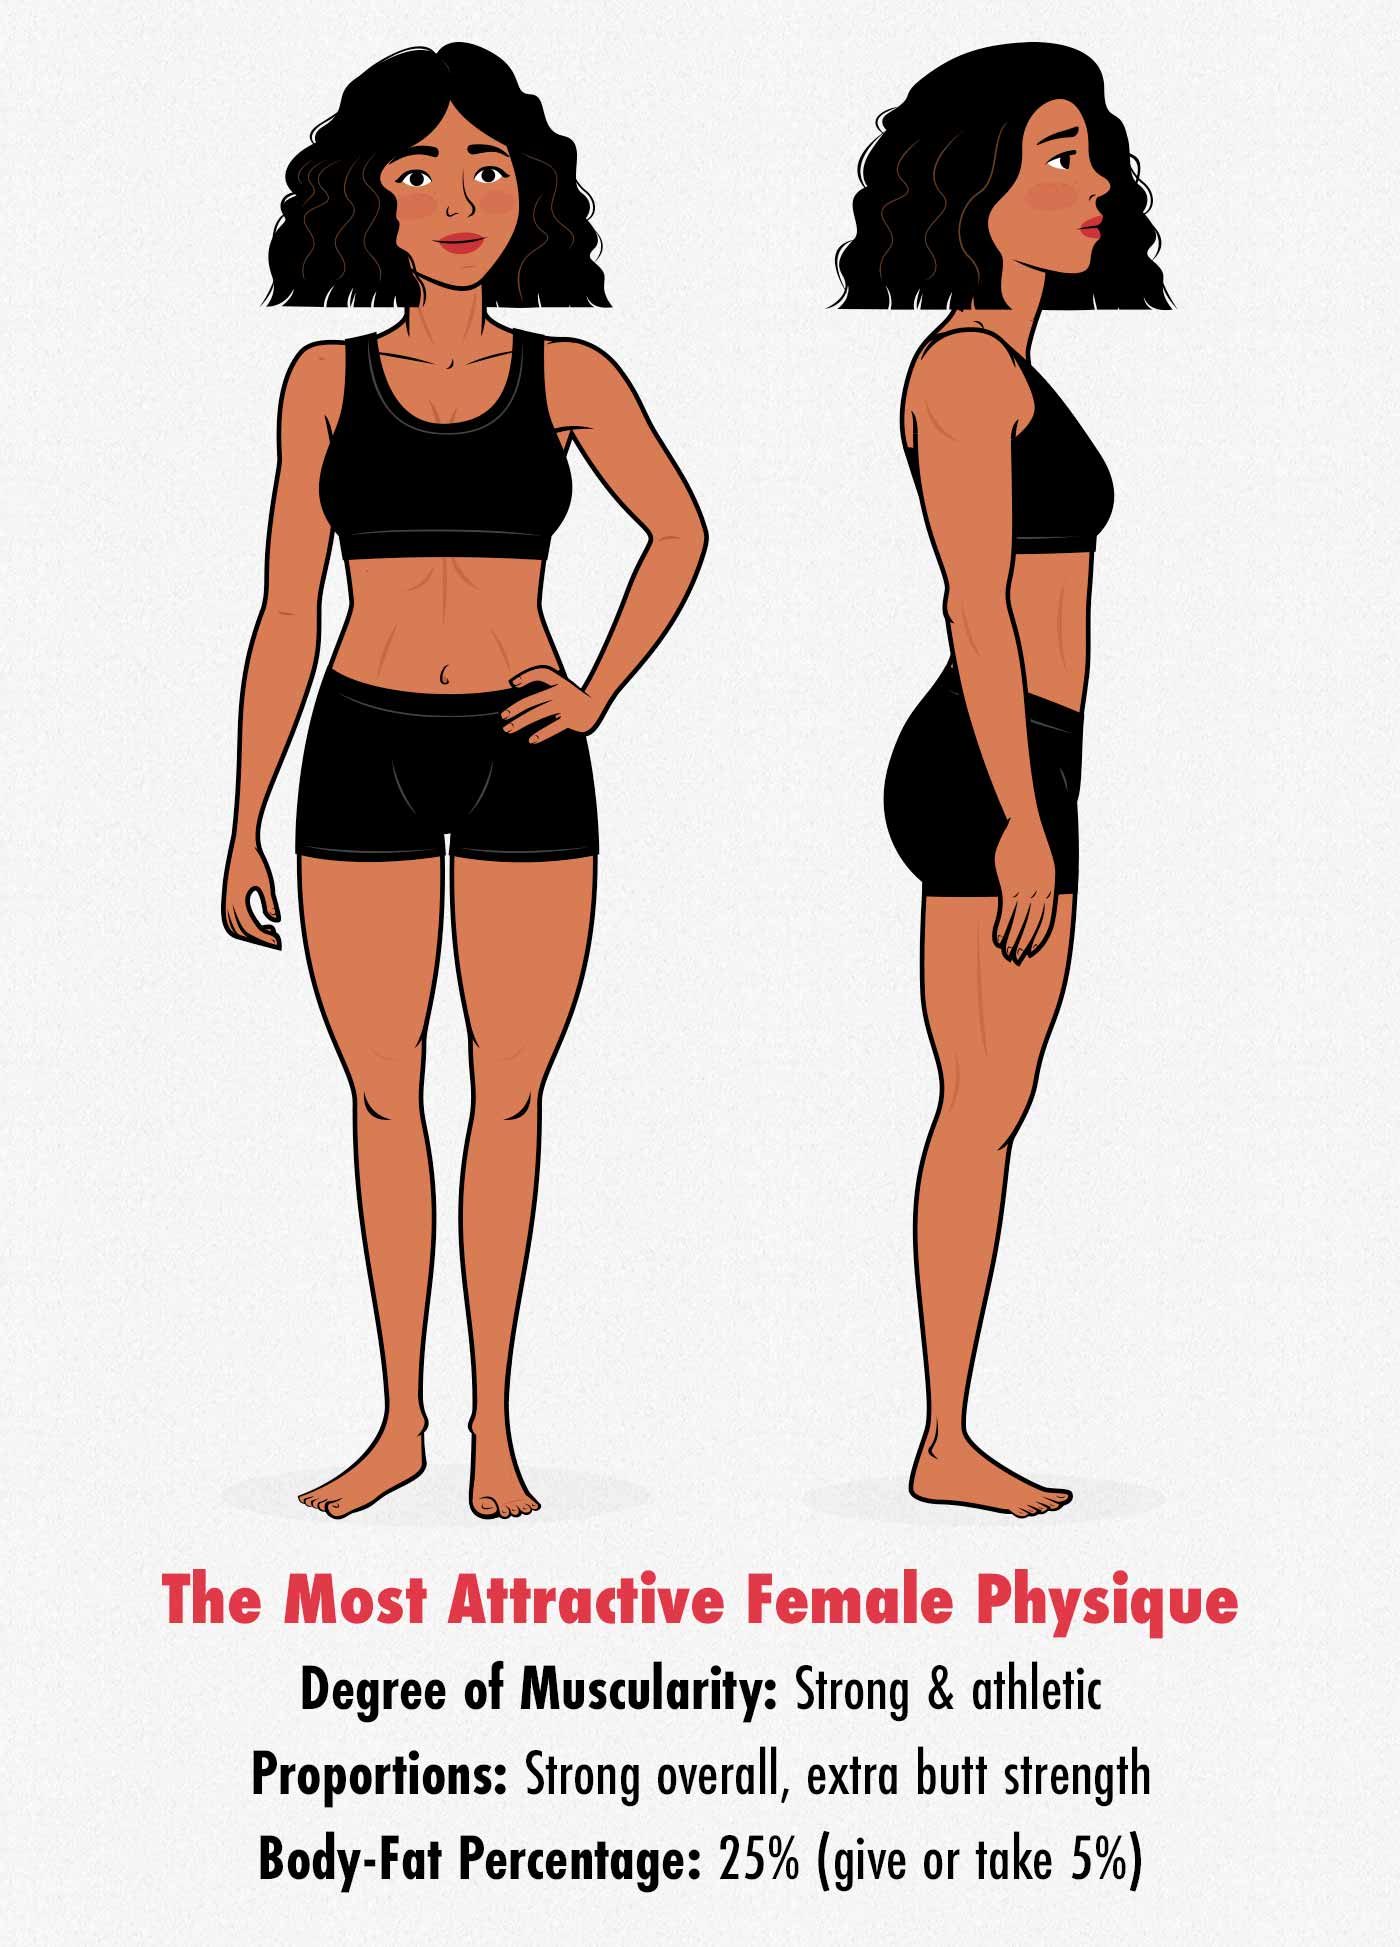 Survey results showing that men find women who are fit, healthy, strong, and athletic as the most attractive.